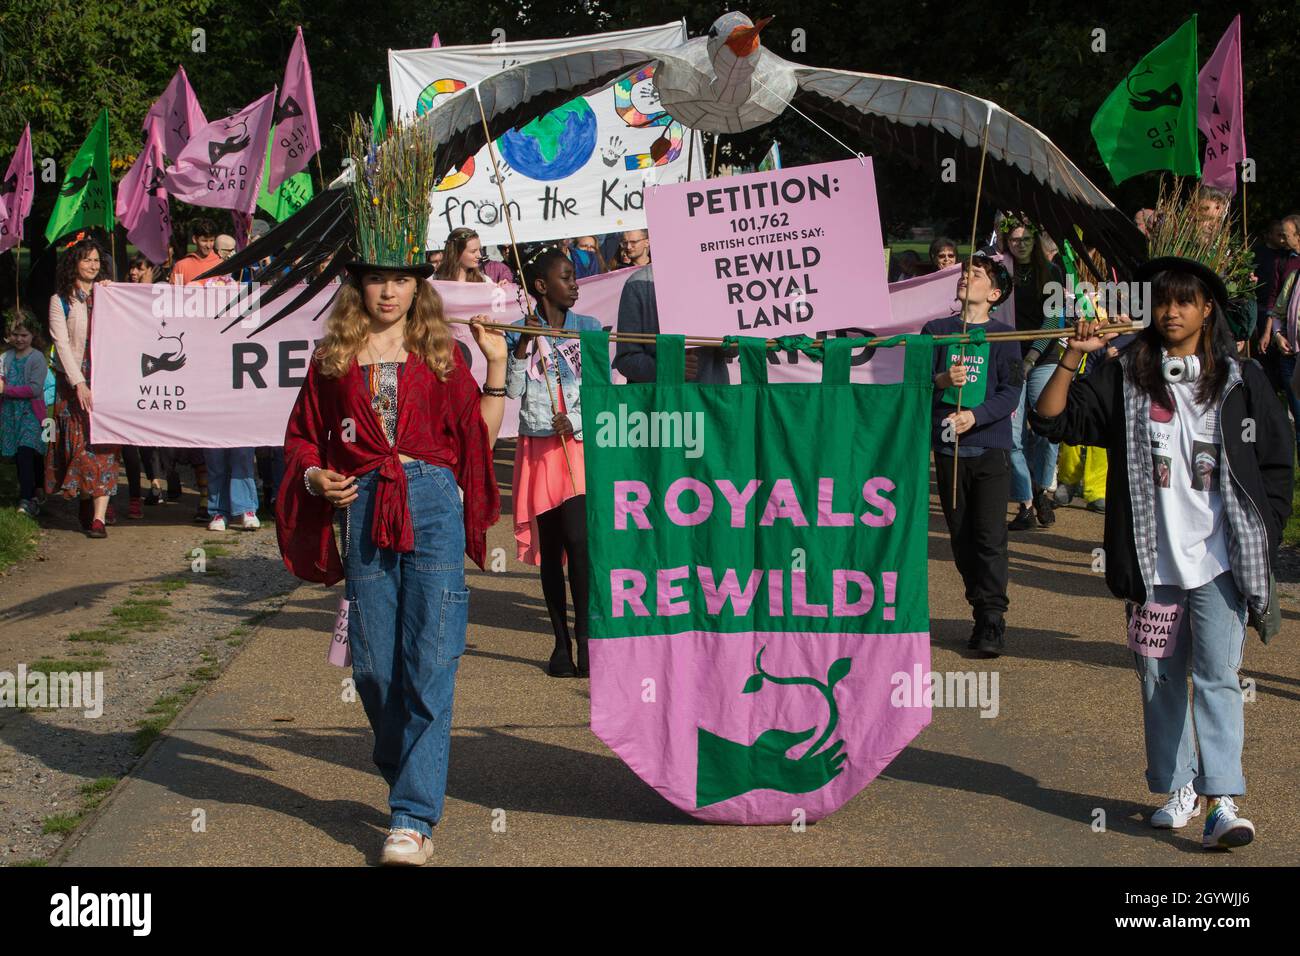 London, UK. 9th October, 2021. Climate activists, including many families, take part in a Rewild Royal Land procession to Buckingham Palace organised by Wild Card, a new campaign calling on the UK’s biggest landowners to rewild, together with 38 Degrees. Campaigners including conservationist and broadcaster Chris Packham are calling on the Royal Family, the largest landowning family in the UK, to rewild their estates in order to assist with tackling the climate crisis and a 14-year-old boy presented a petition at the gates of Buckingham Palace signed by over 100,000 people. Credit: Mark Kerris Stock Photo